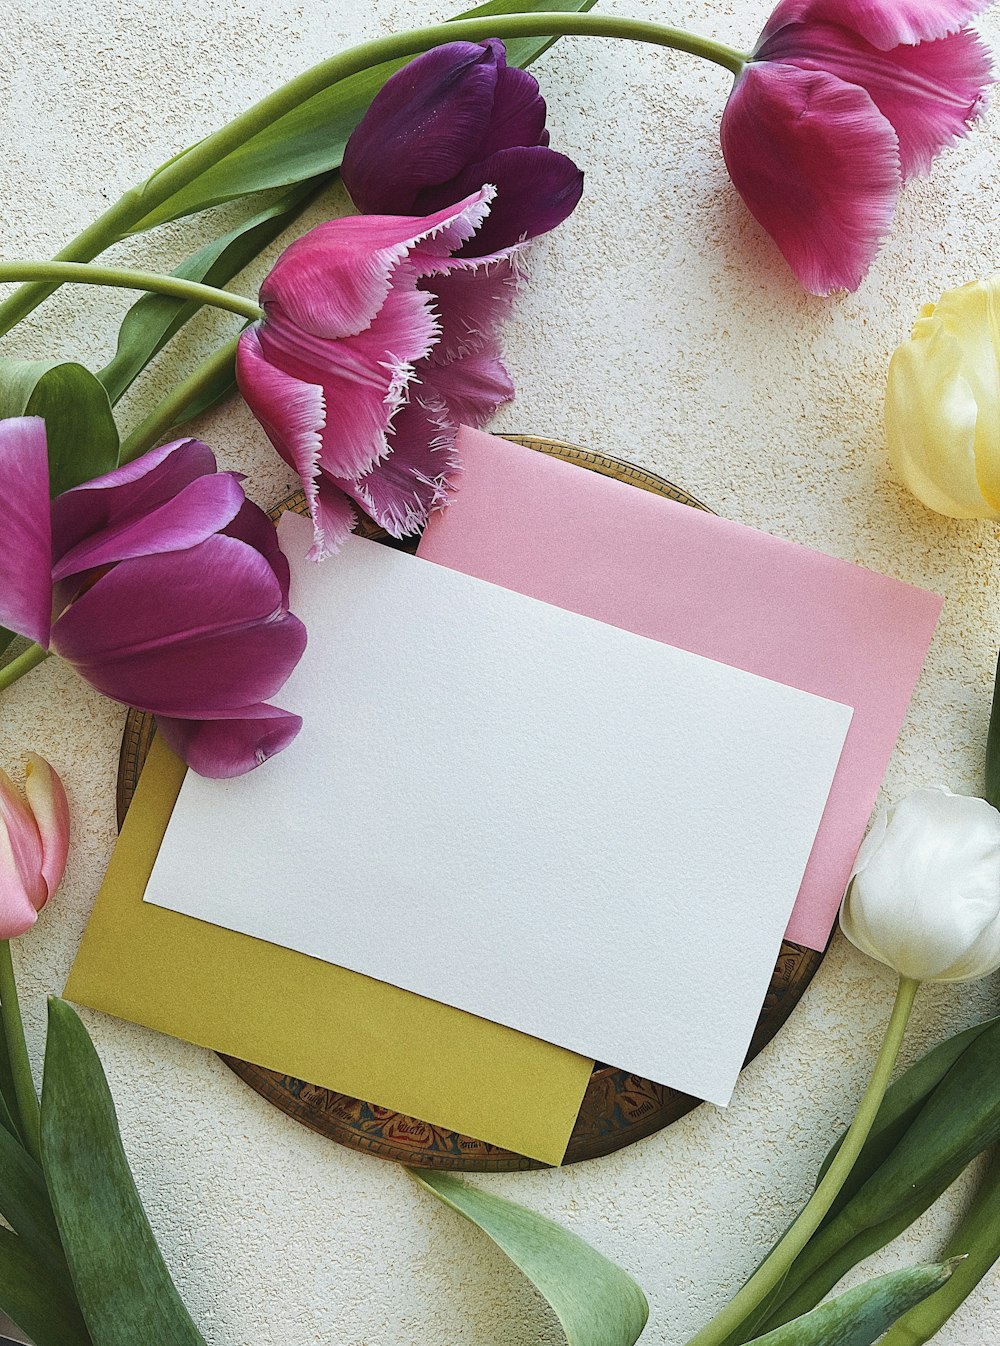 a card with a blank paper surrounded by tulips